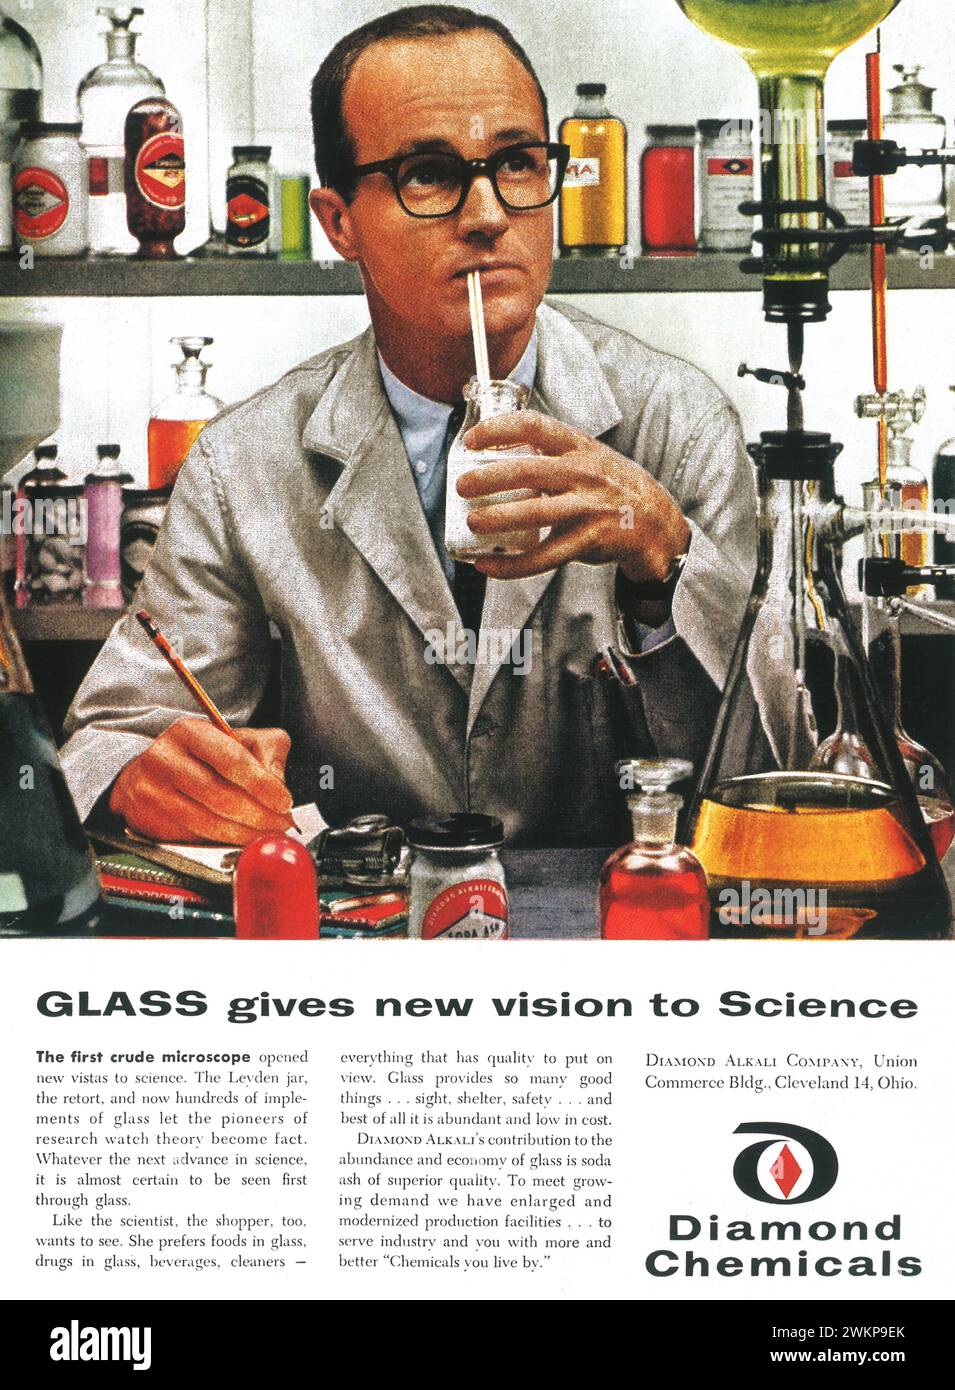 1958 Diamond Chemicals Print Ad Diamond Alkali's contribution to the production of glass with soda ash Stock Photo